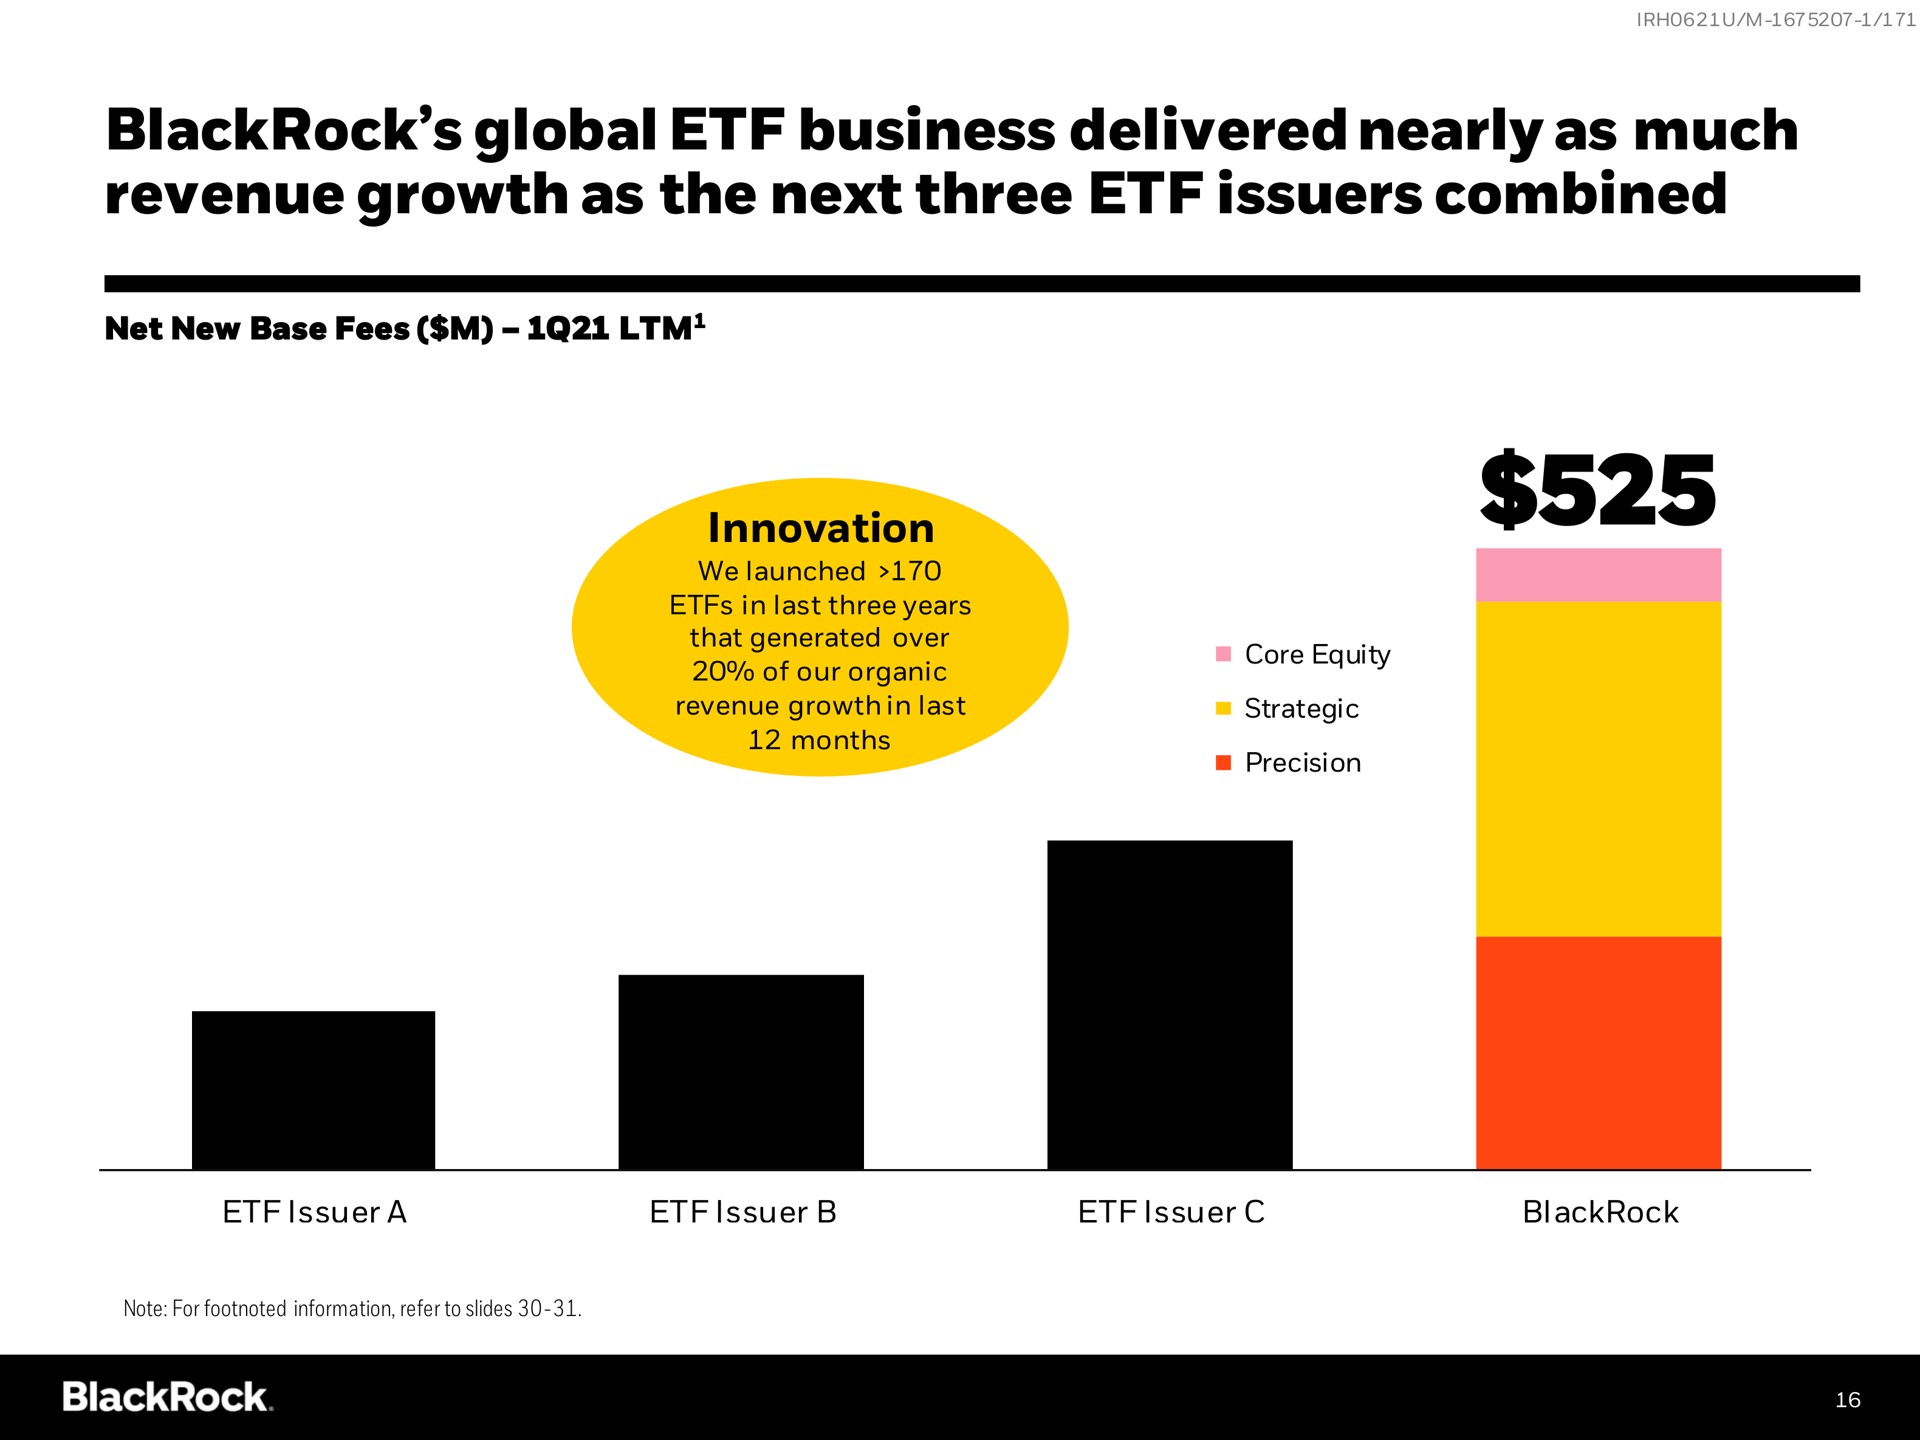 global business delivered nearly as much revenue growth as the next three issuers combined | BlackRock